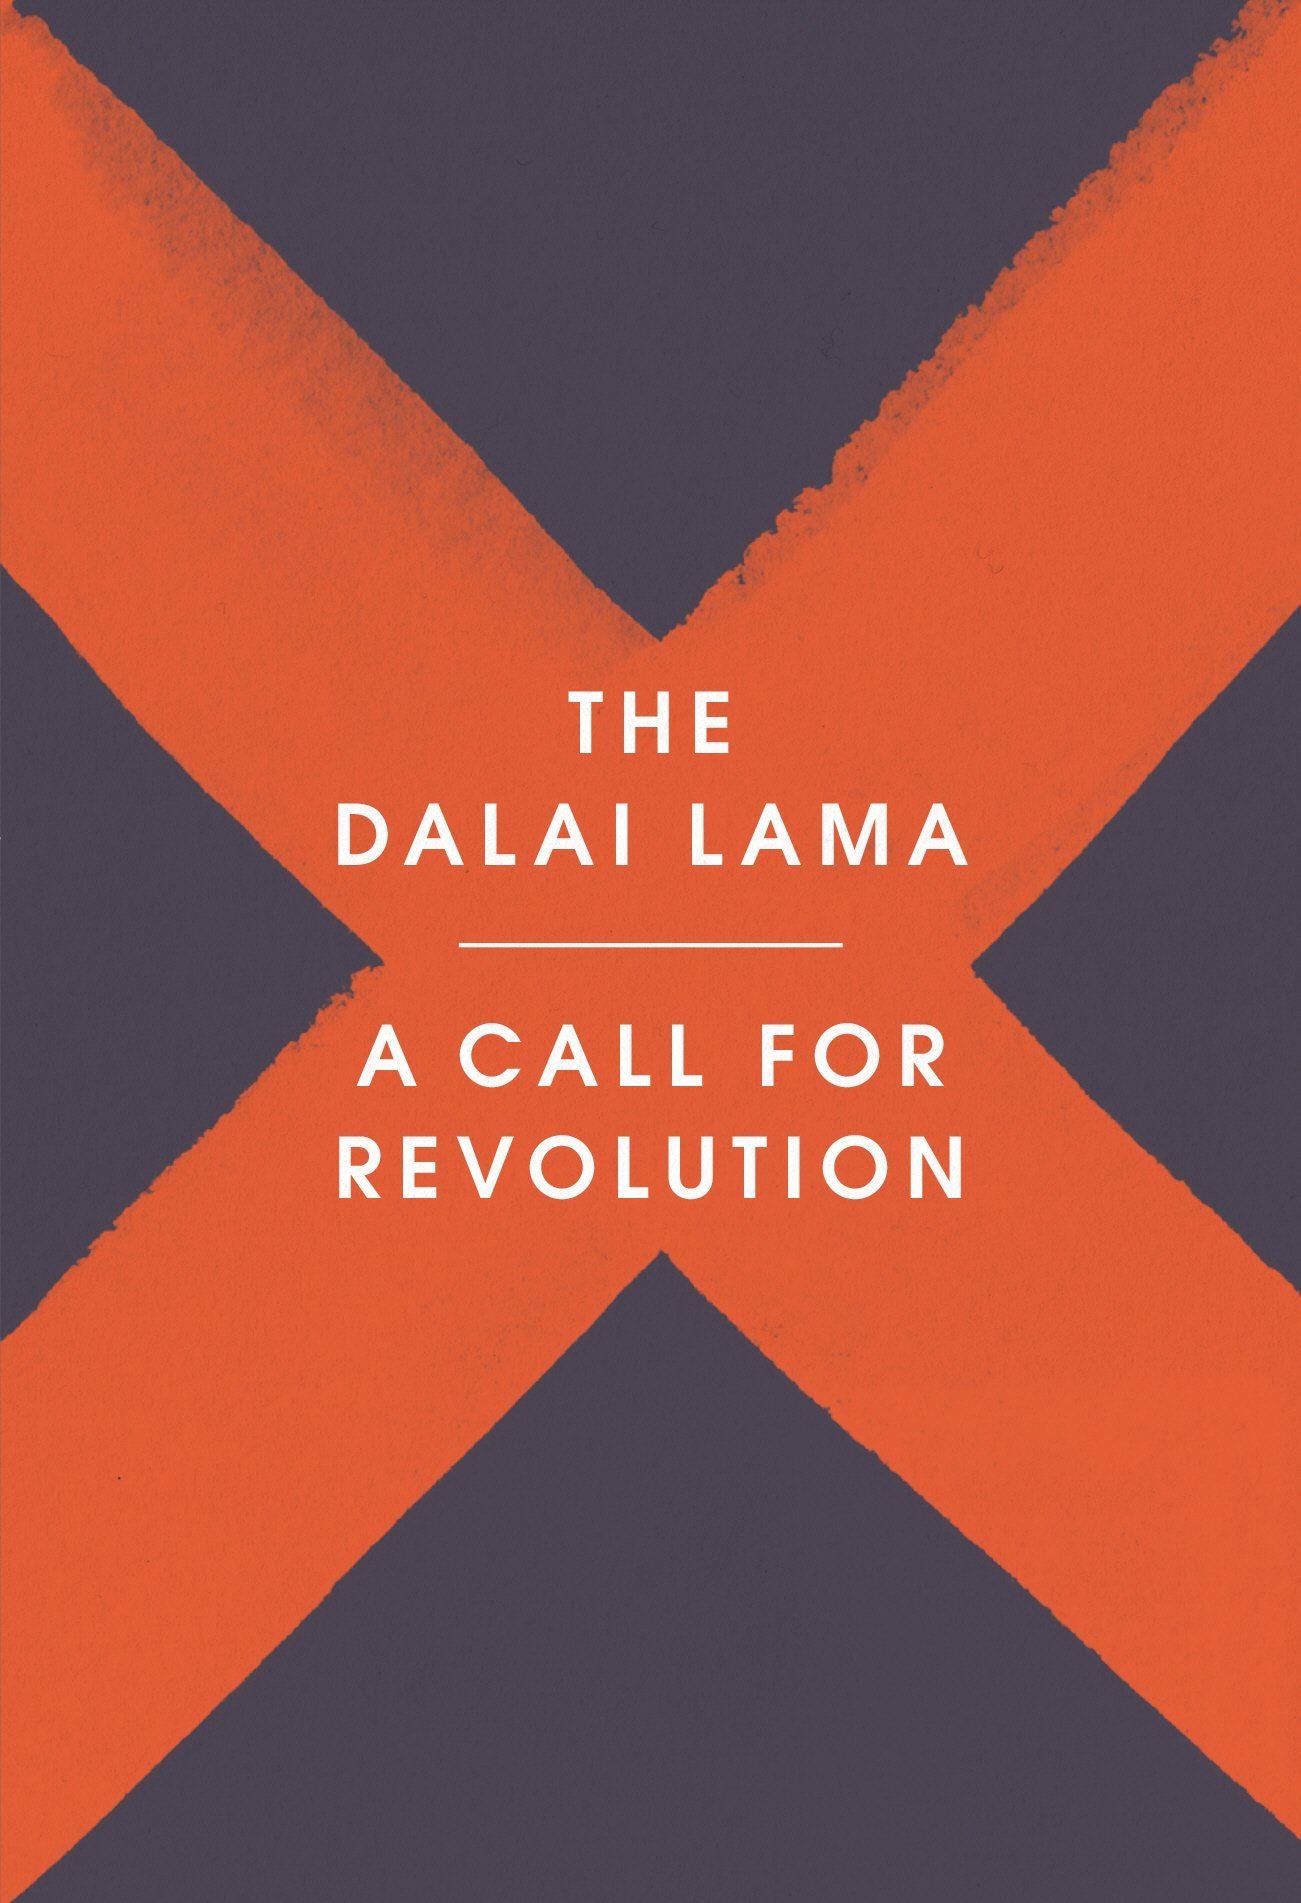 Call For Revolution by The Dalai Lama